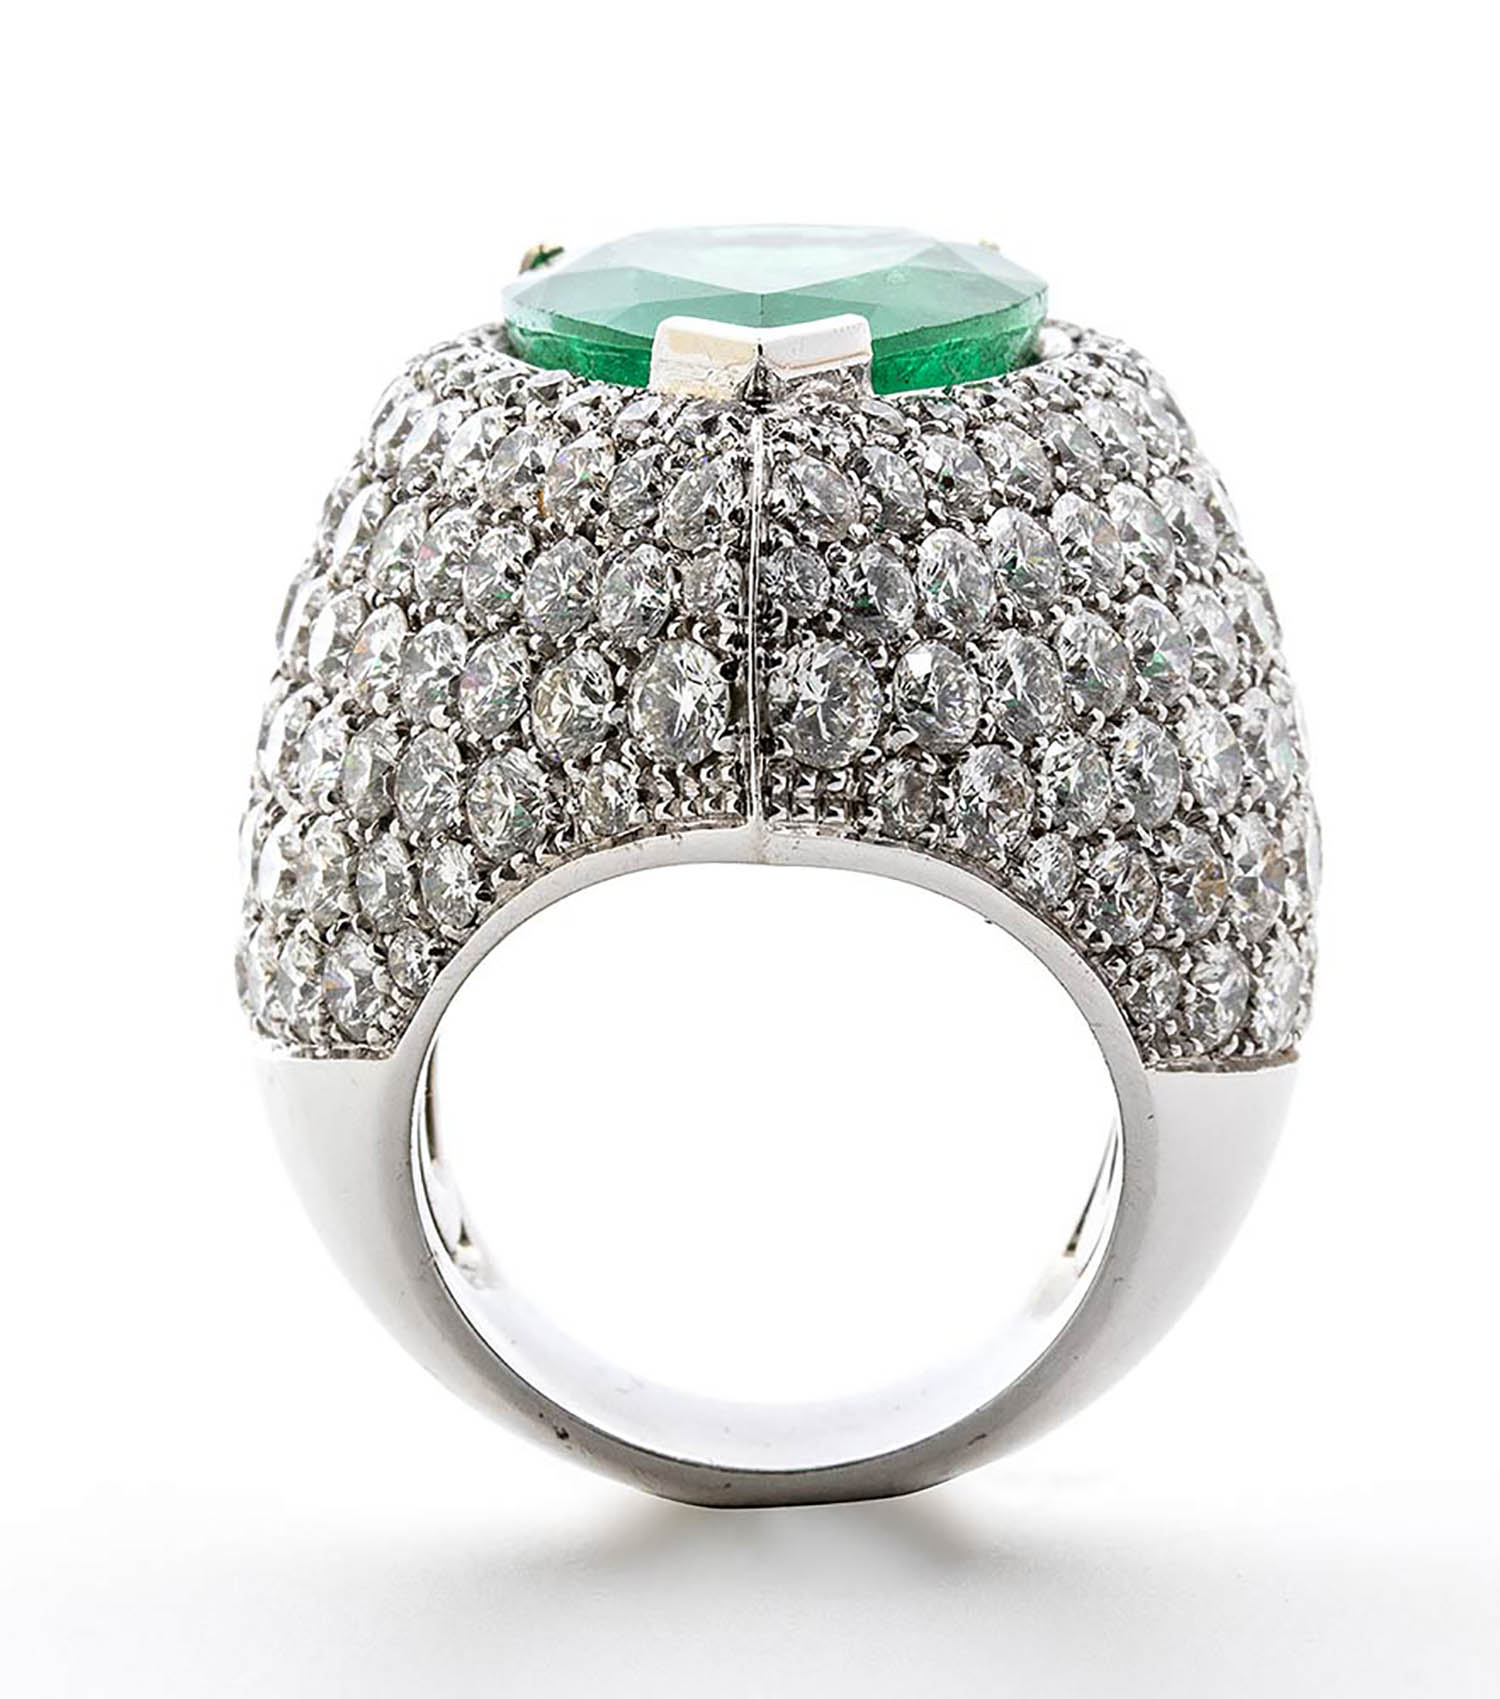 Emerald and diamonds ring - Image 2 of 8